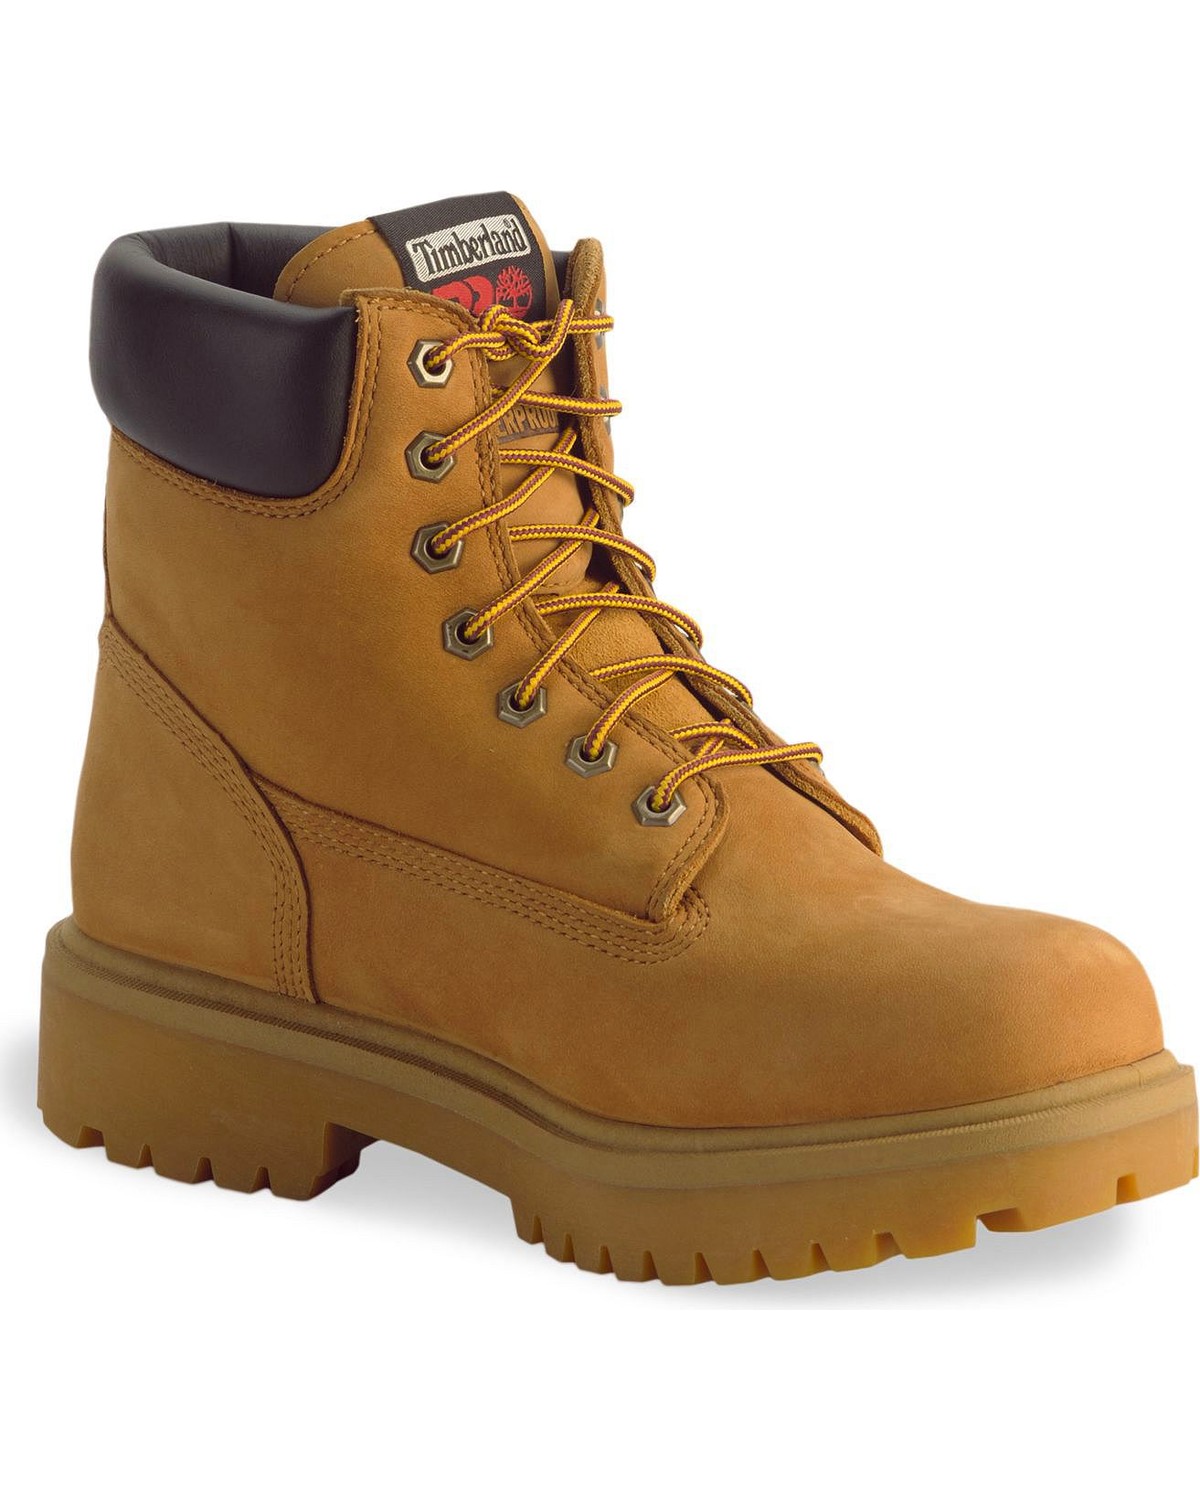 Timberland Pro 6" Insulated Waterproof Boots - Steel Toe